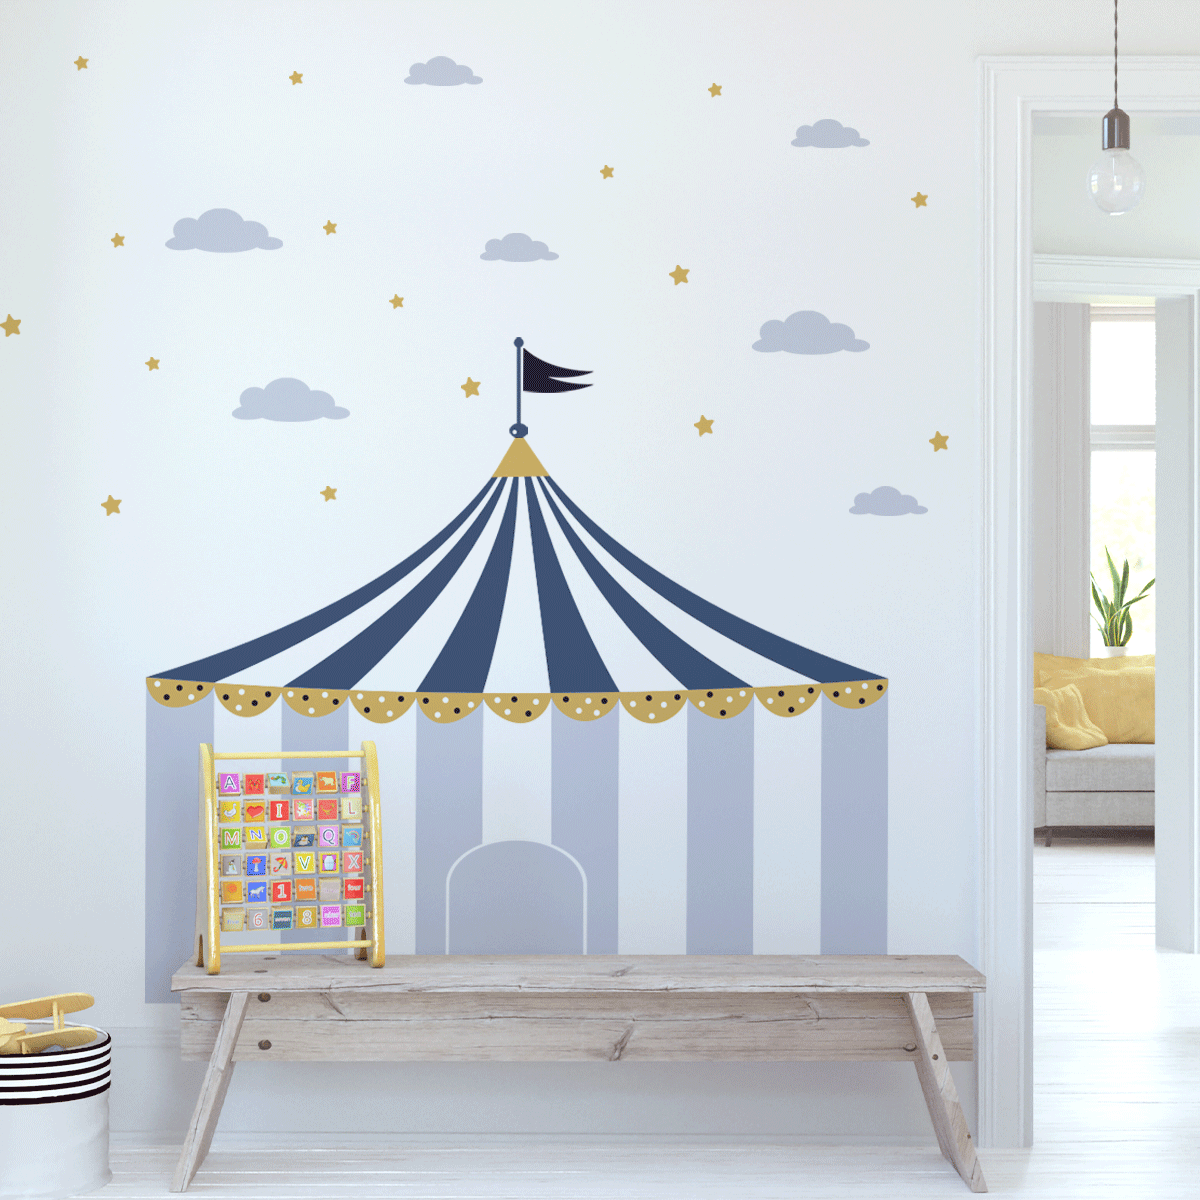 circus wall stickers, circus wall decal